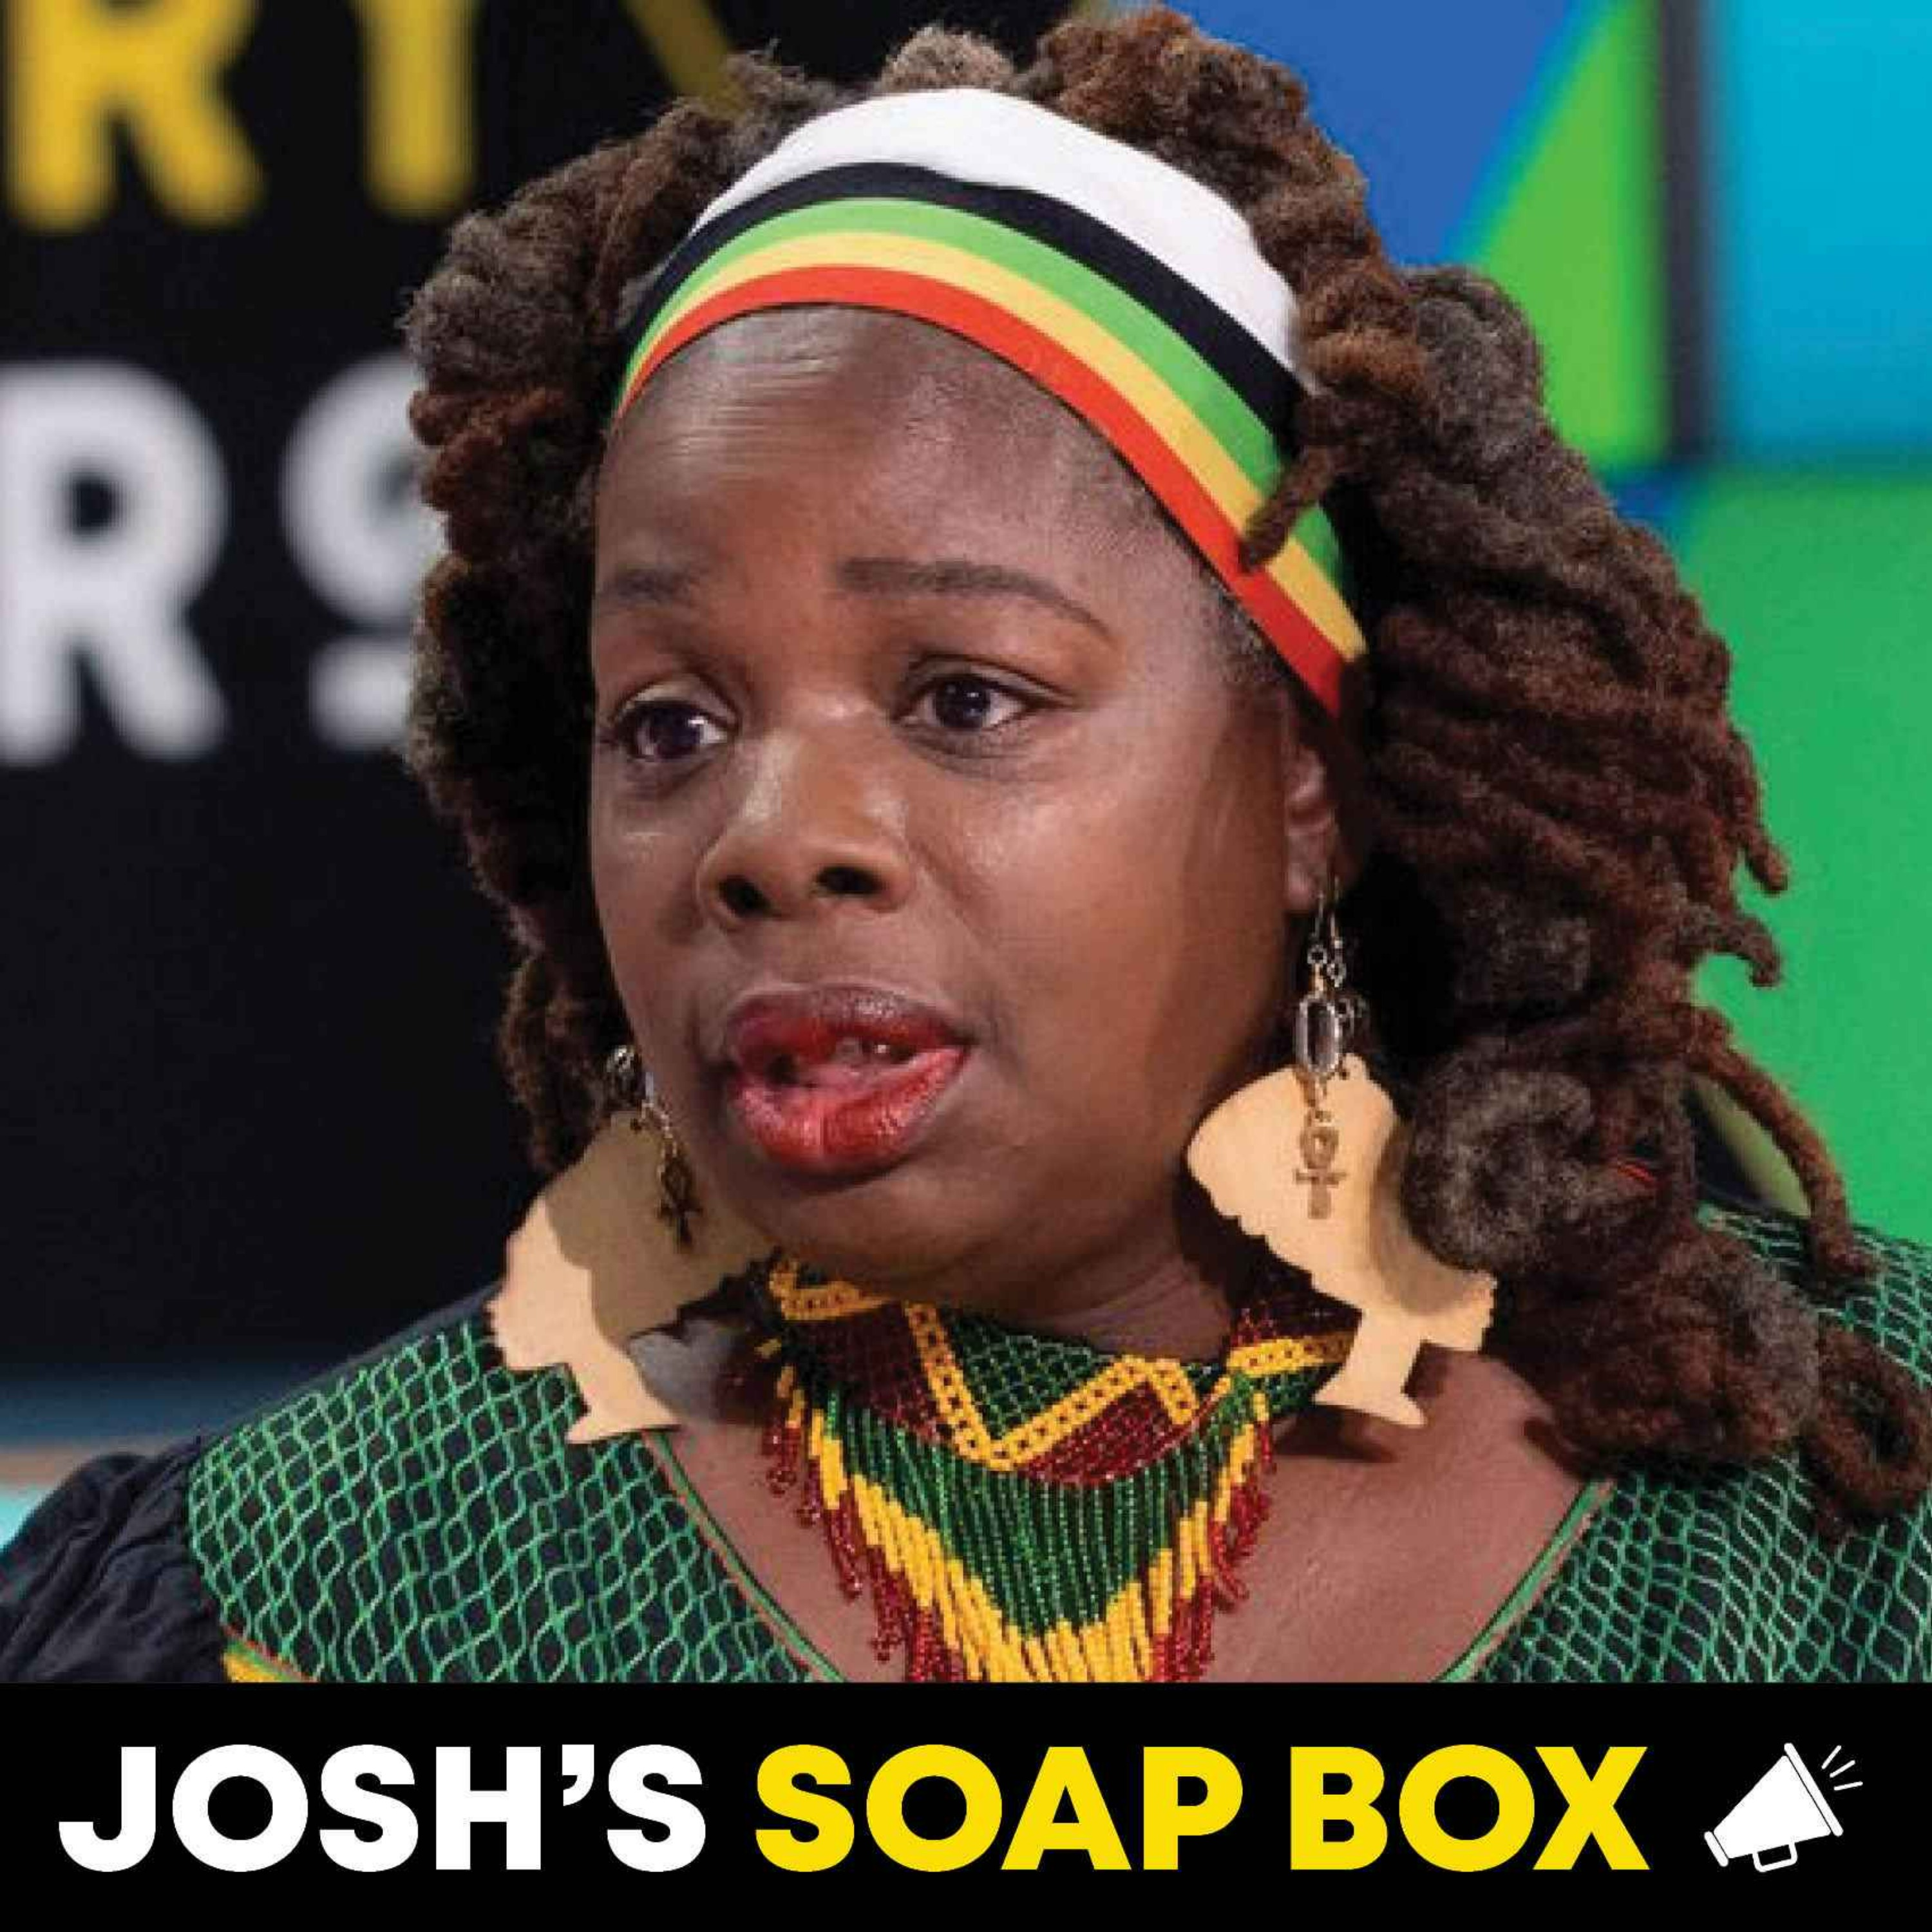 Josh's Soap Box: Is It Racist To Ask Where You're From?